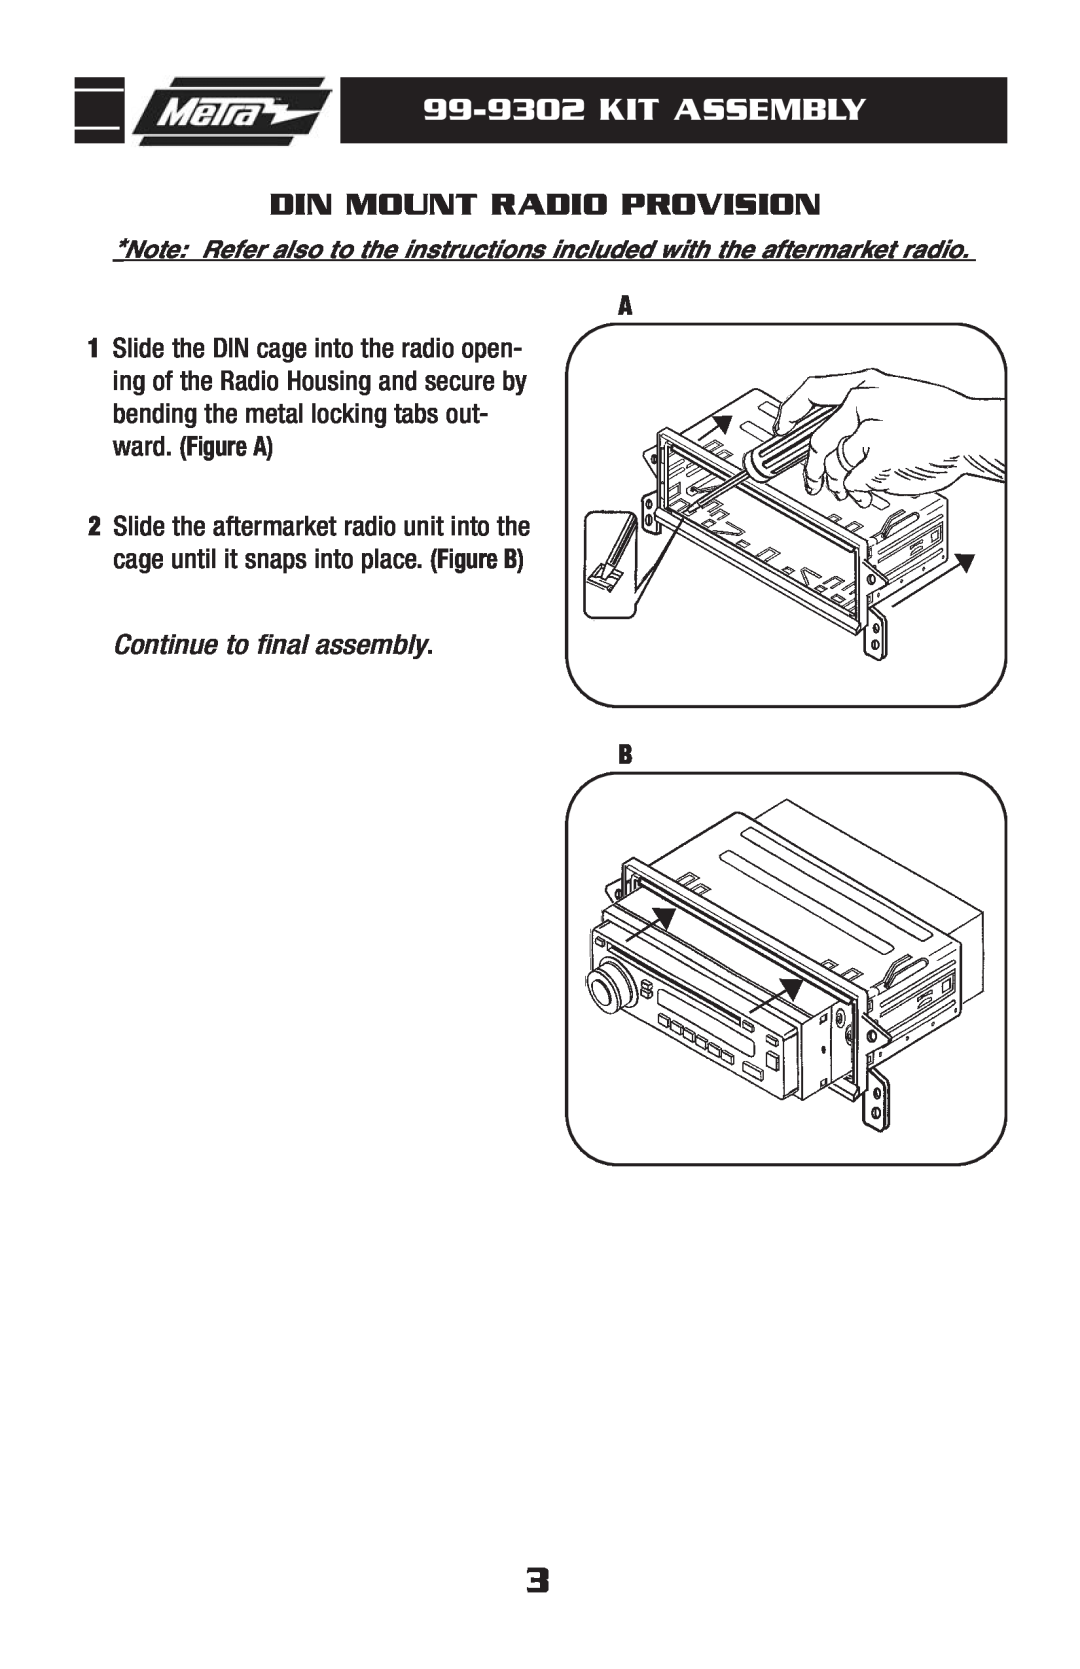 Metra Electronics 99-9302 installation instructions Kit Assembly, Din Mount Radio Provision, Continue to final assembly 